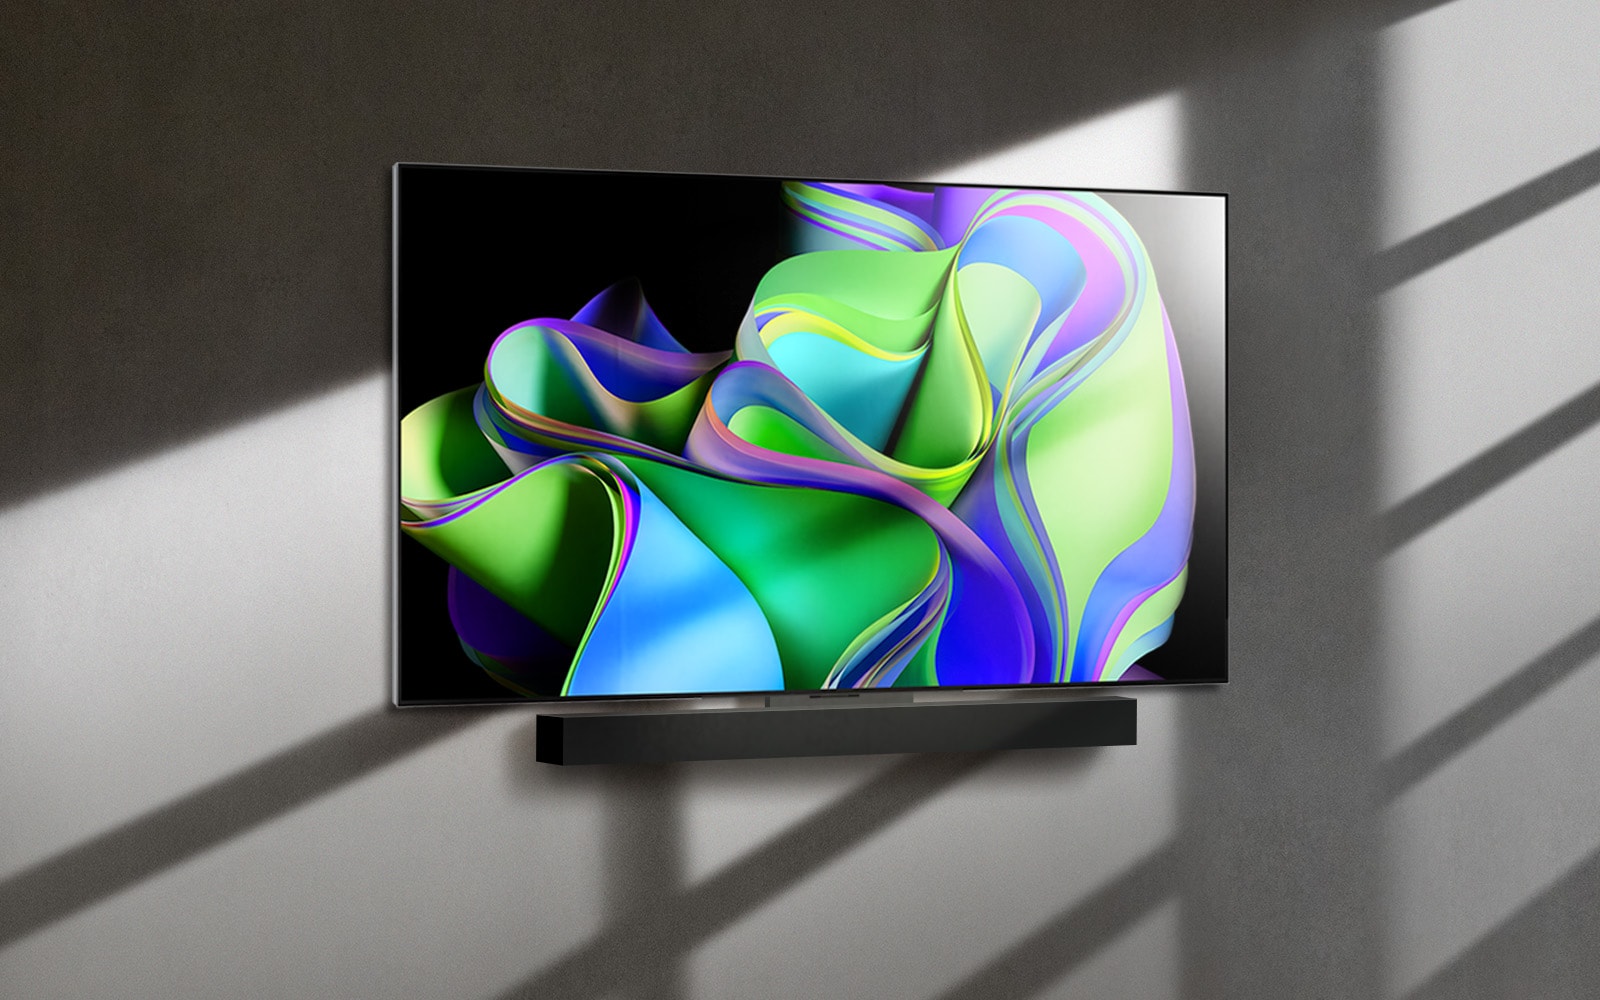 A video opens with the words LG OLED evo in a white font against a black background. The words enlargen and fill with colour. Then the scene transitions to LG OLED G3, showing a colourful abstract artwork. The screen rotates to the side to present the slim edge and then fixes to a wall, representing the One Wall Design.